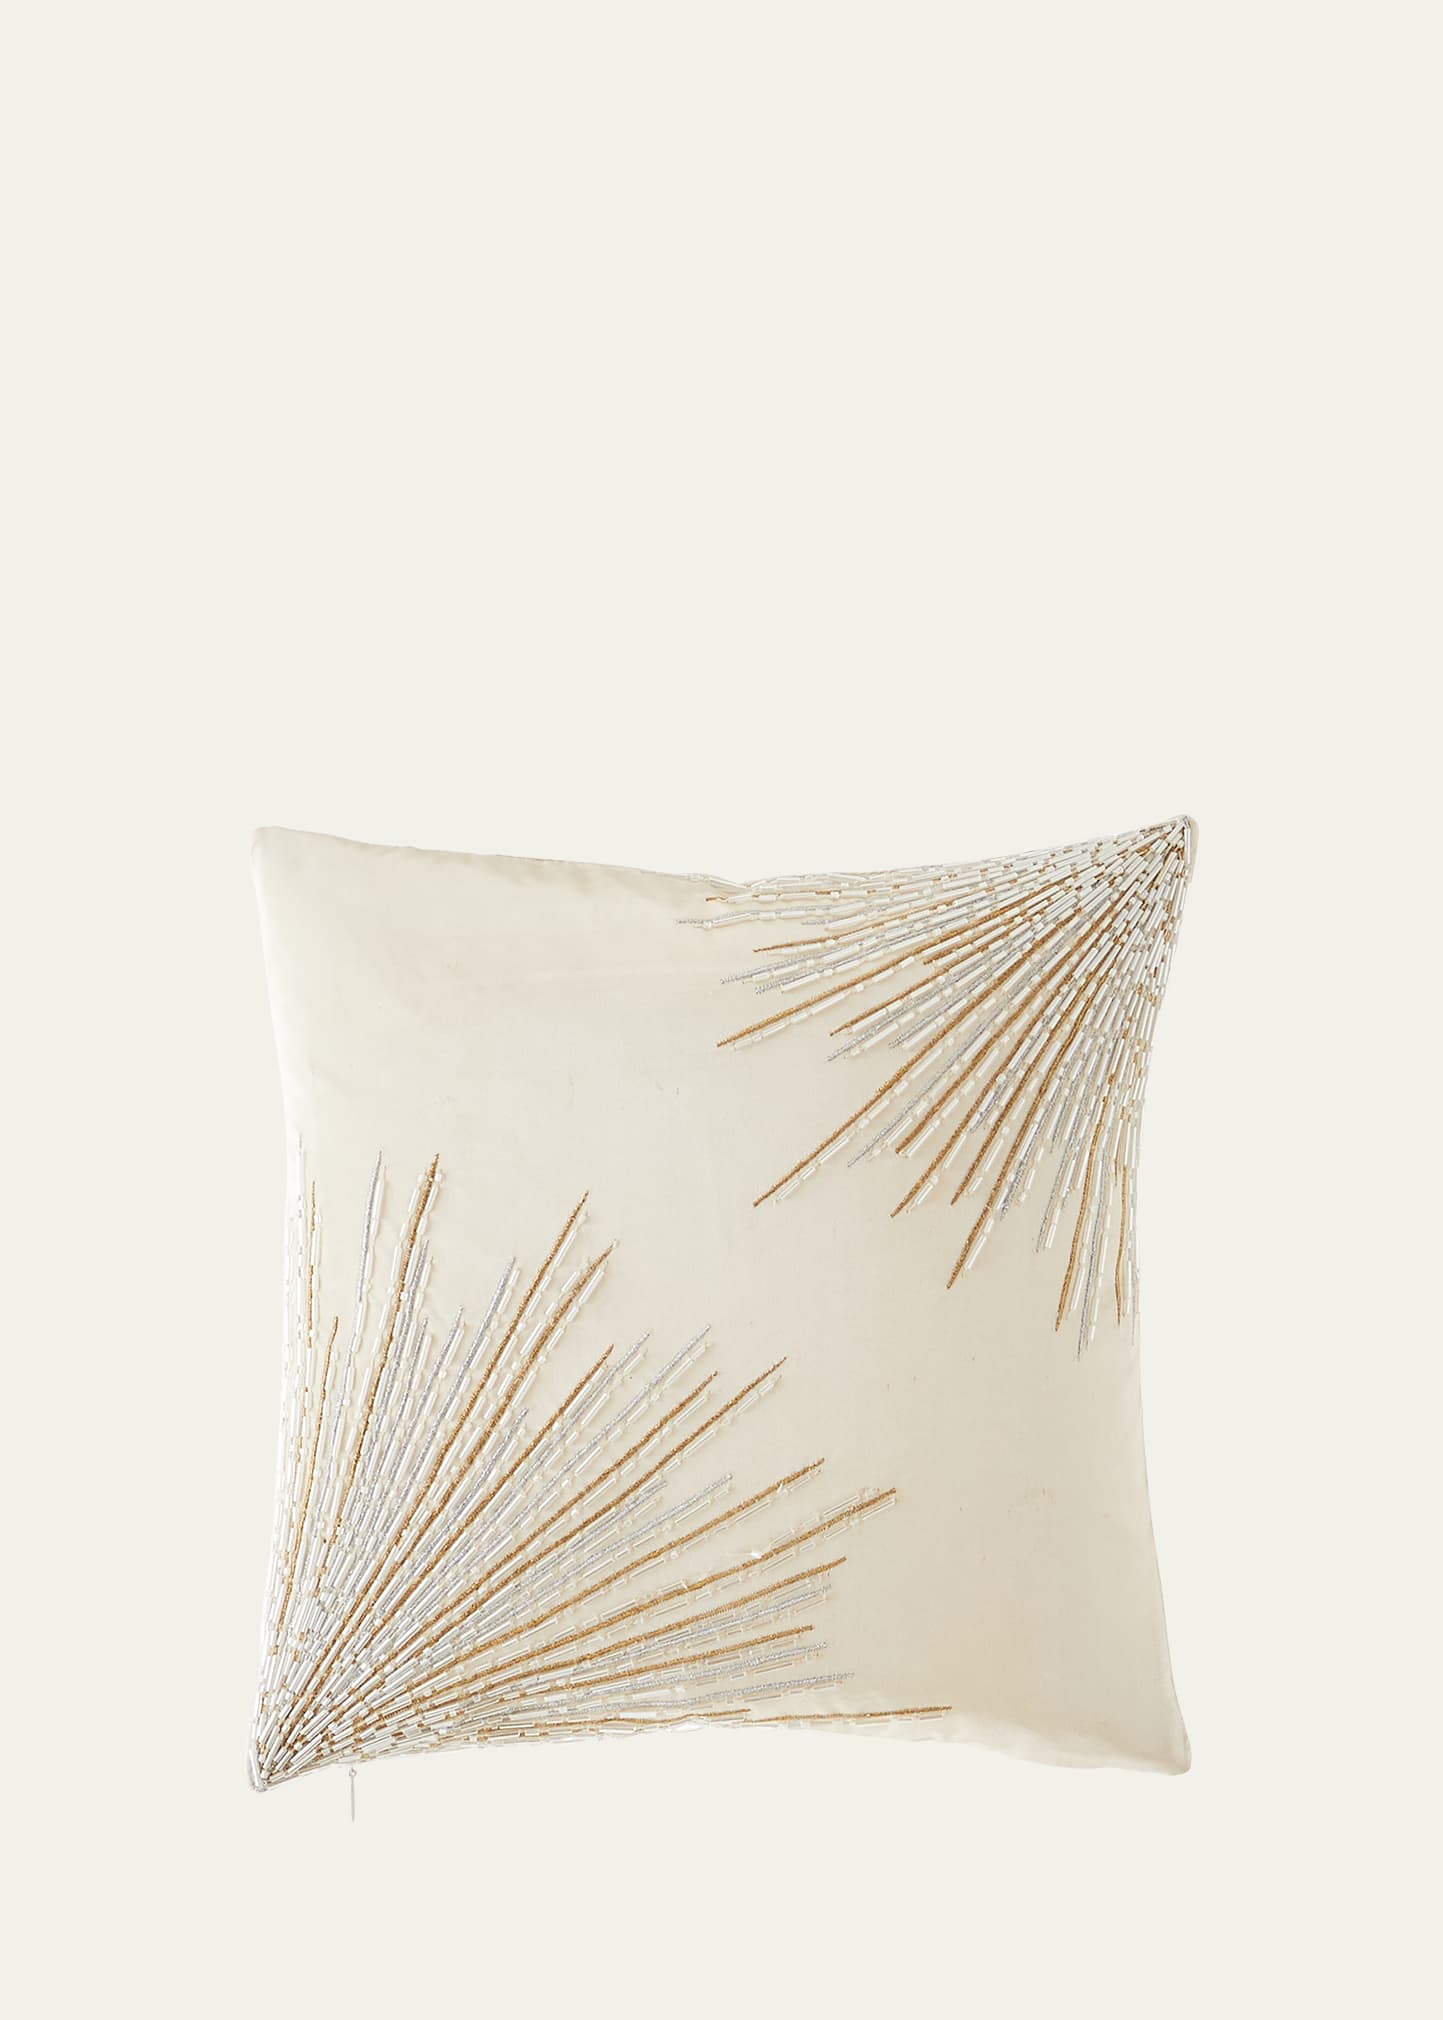 Donna Karan Home 12" Seduction Embroidered And Beaded Decorative Pillow